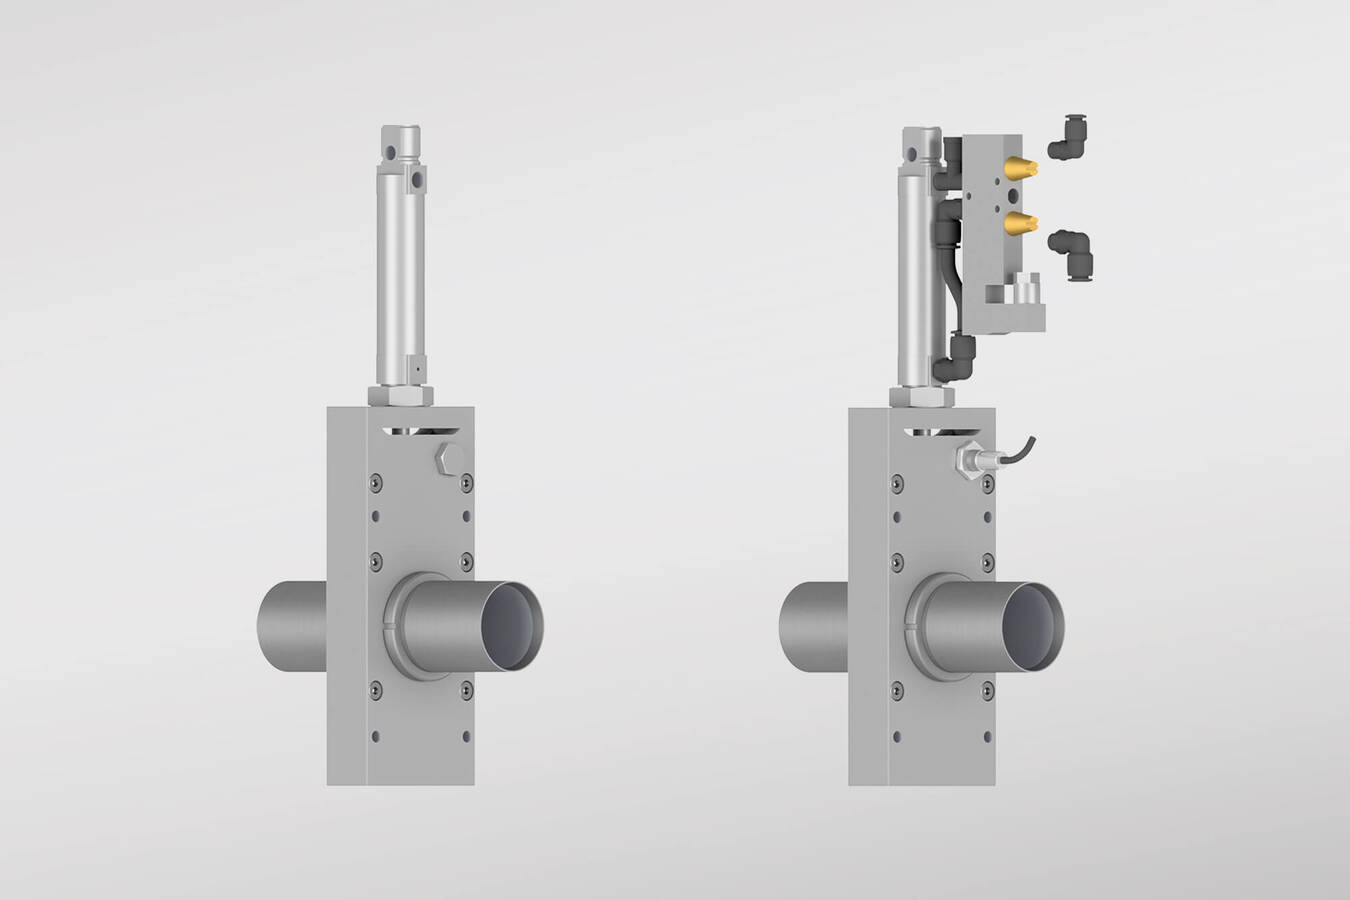 Optimized slide valve with and without sensor for position monitoring.